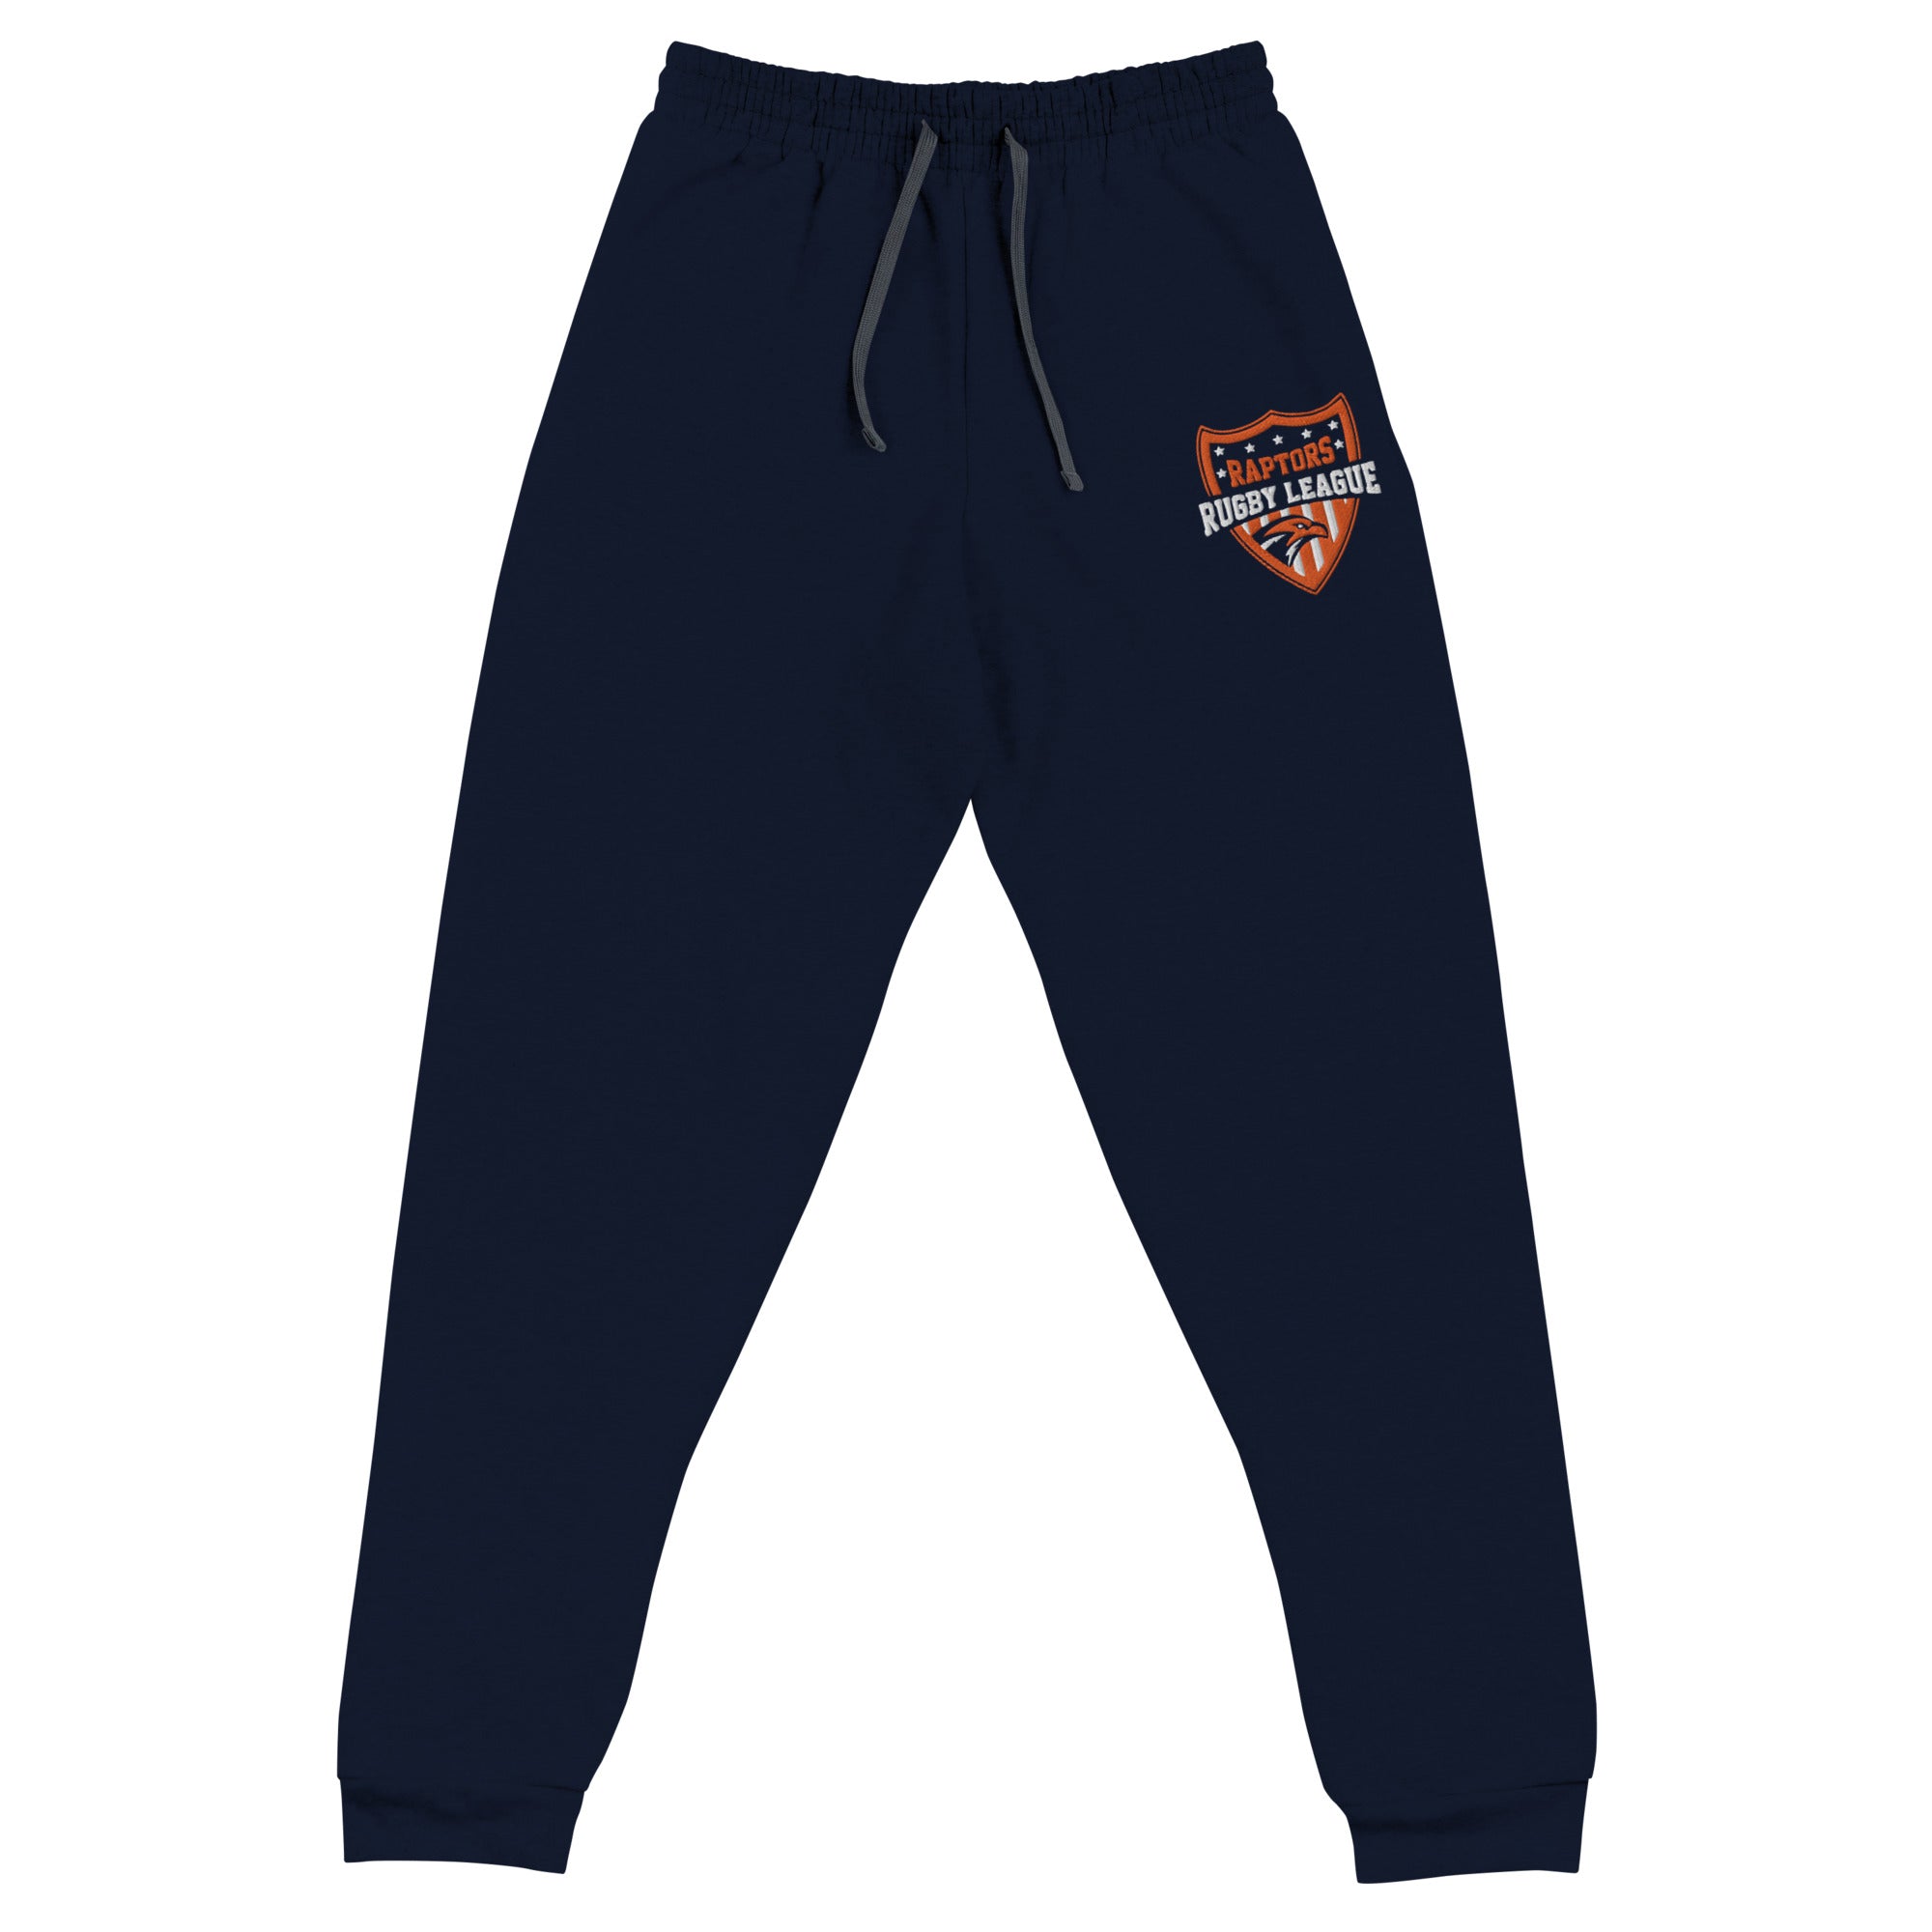 Rugby Imports Unisex Joggers